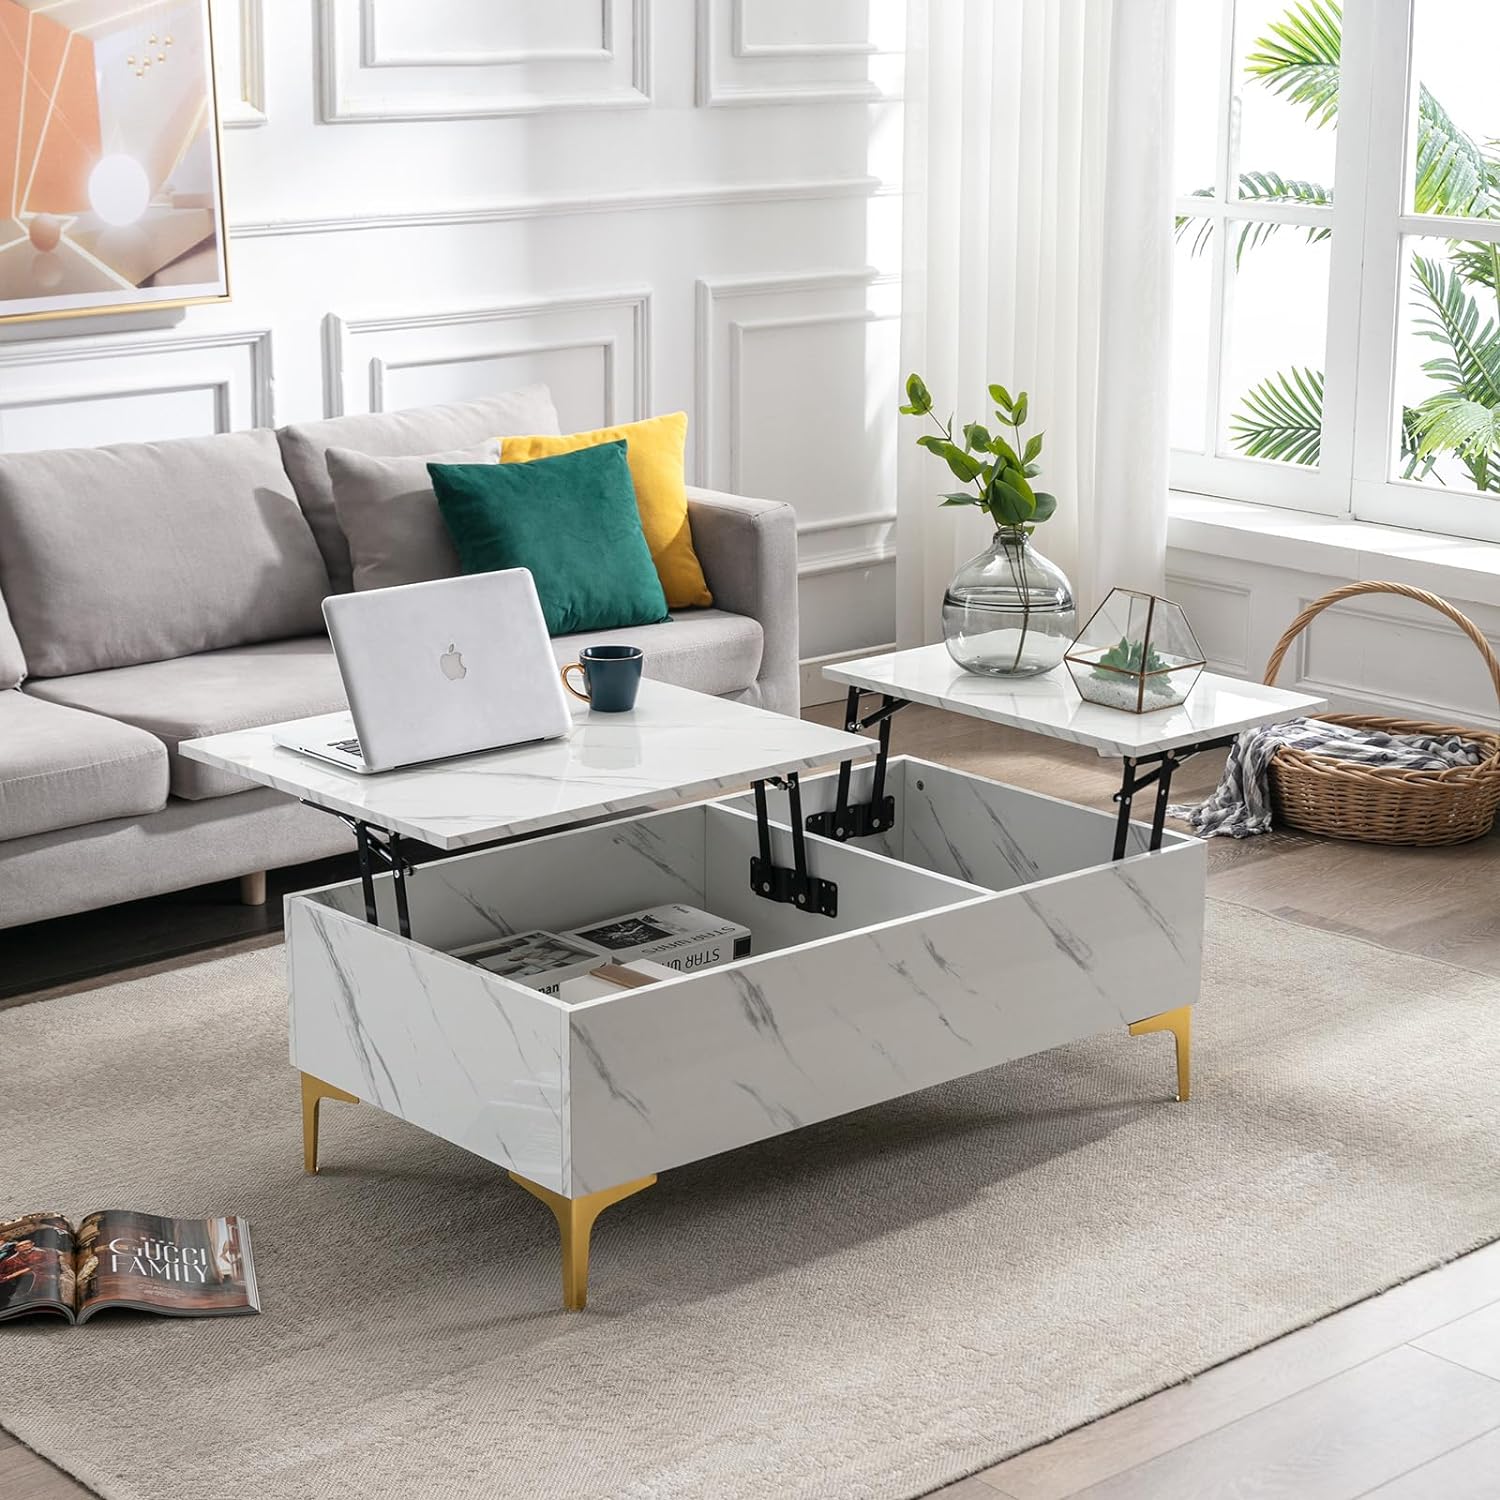 COSVALVE 43 White Marble Lift Top Coffee Table for Living Room, Modern Extendable Pull Up Center Table with Storage, Small Rectangle Cocktail Table, Reception Table